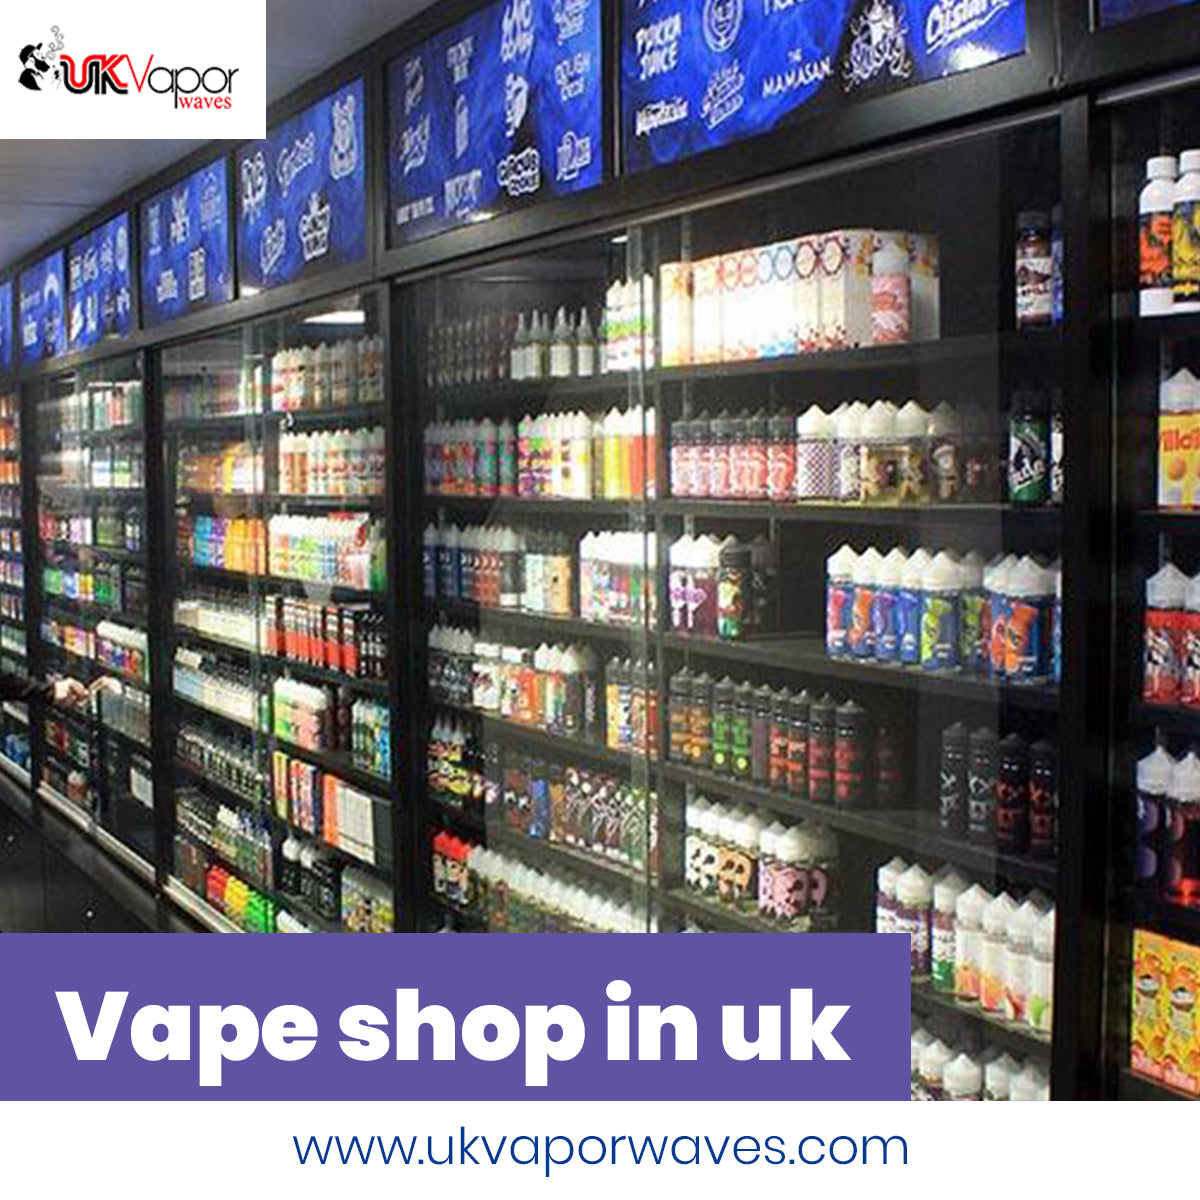 Vape Kits And Shops In The UK